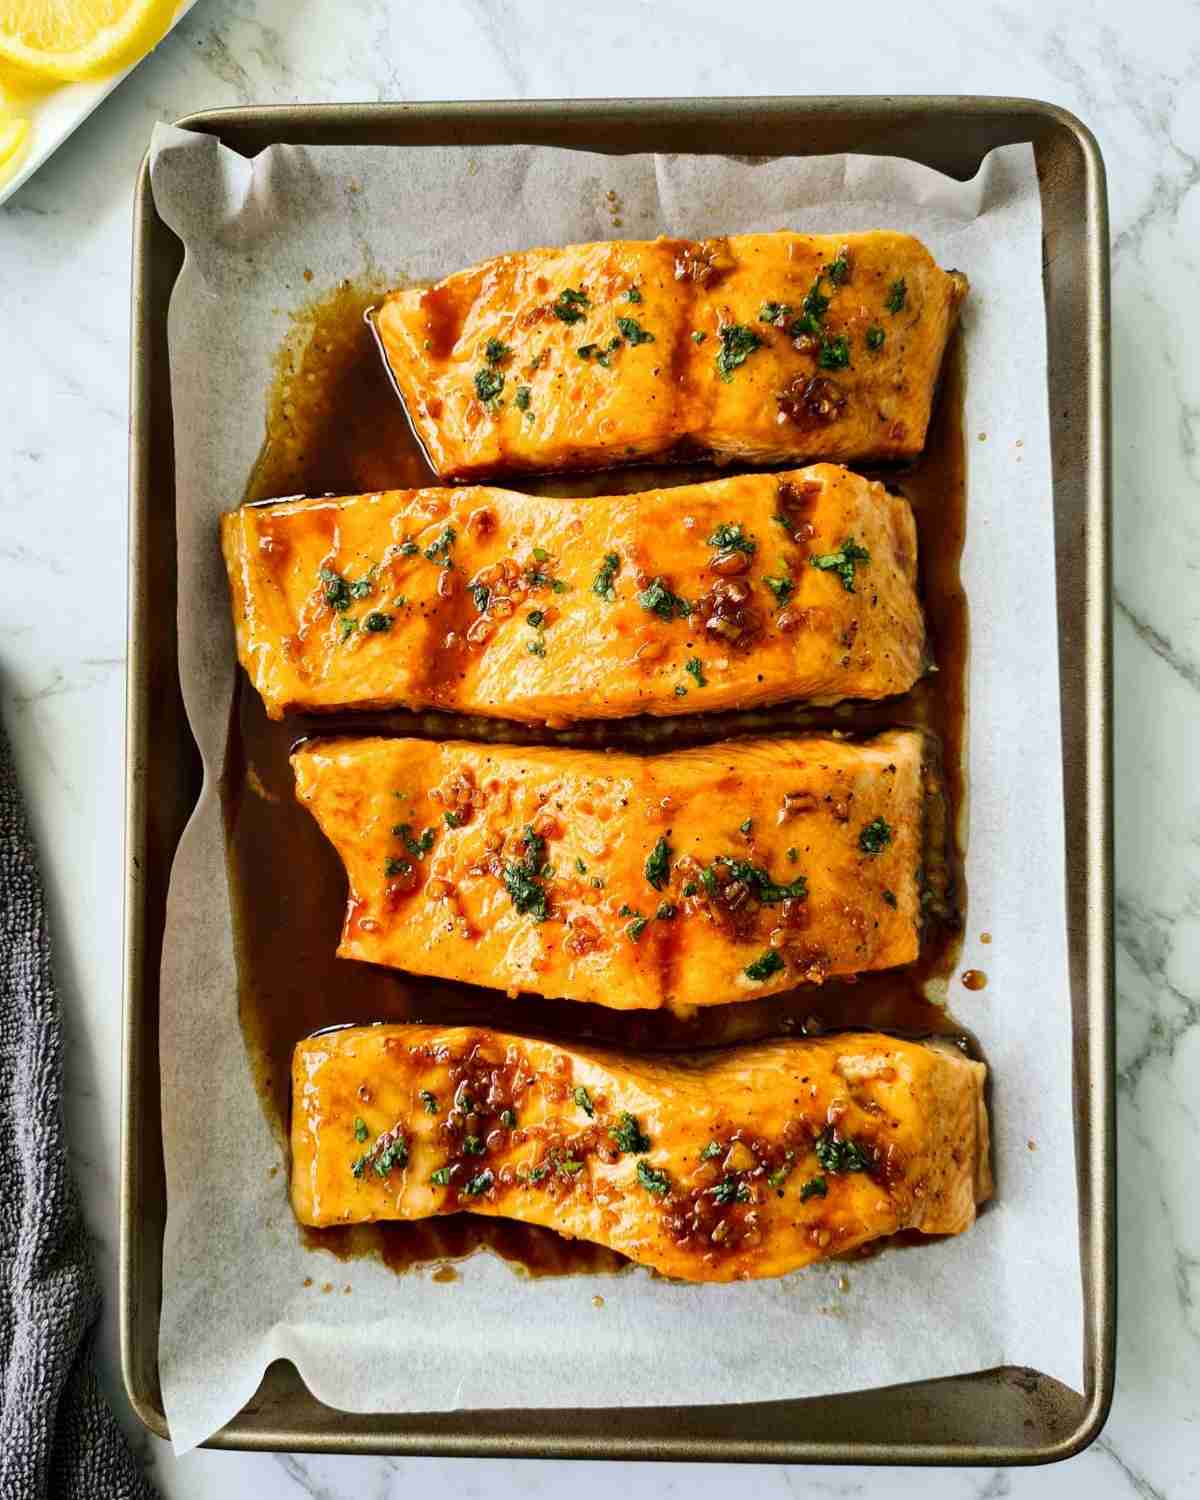 4 cooked salmon fillets in a baking tray with sauce